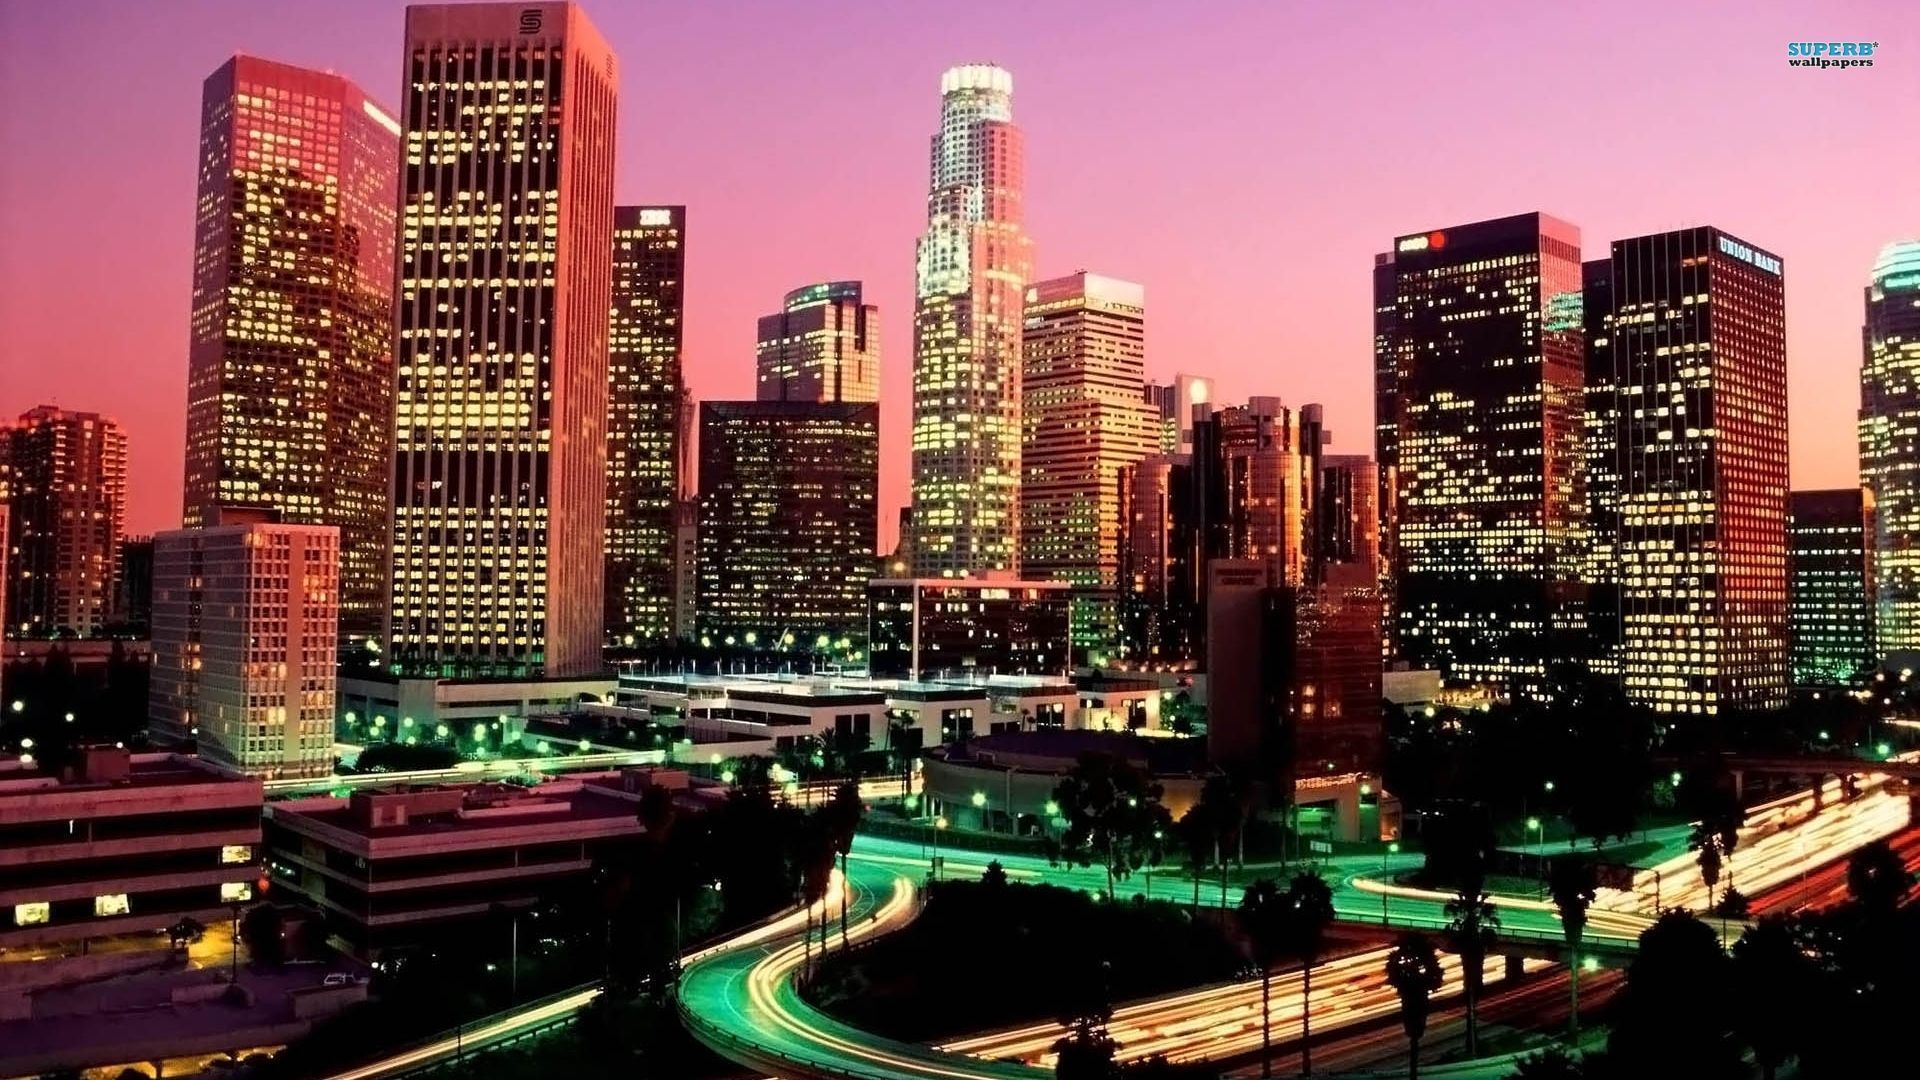 Top Los Angeles Hd Wallpaper Images for Pinterest